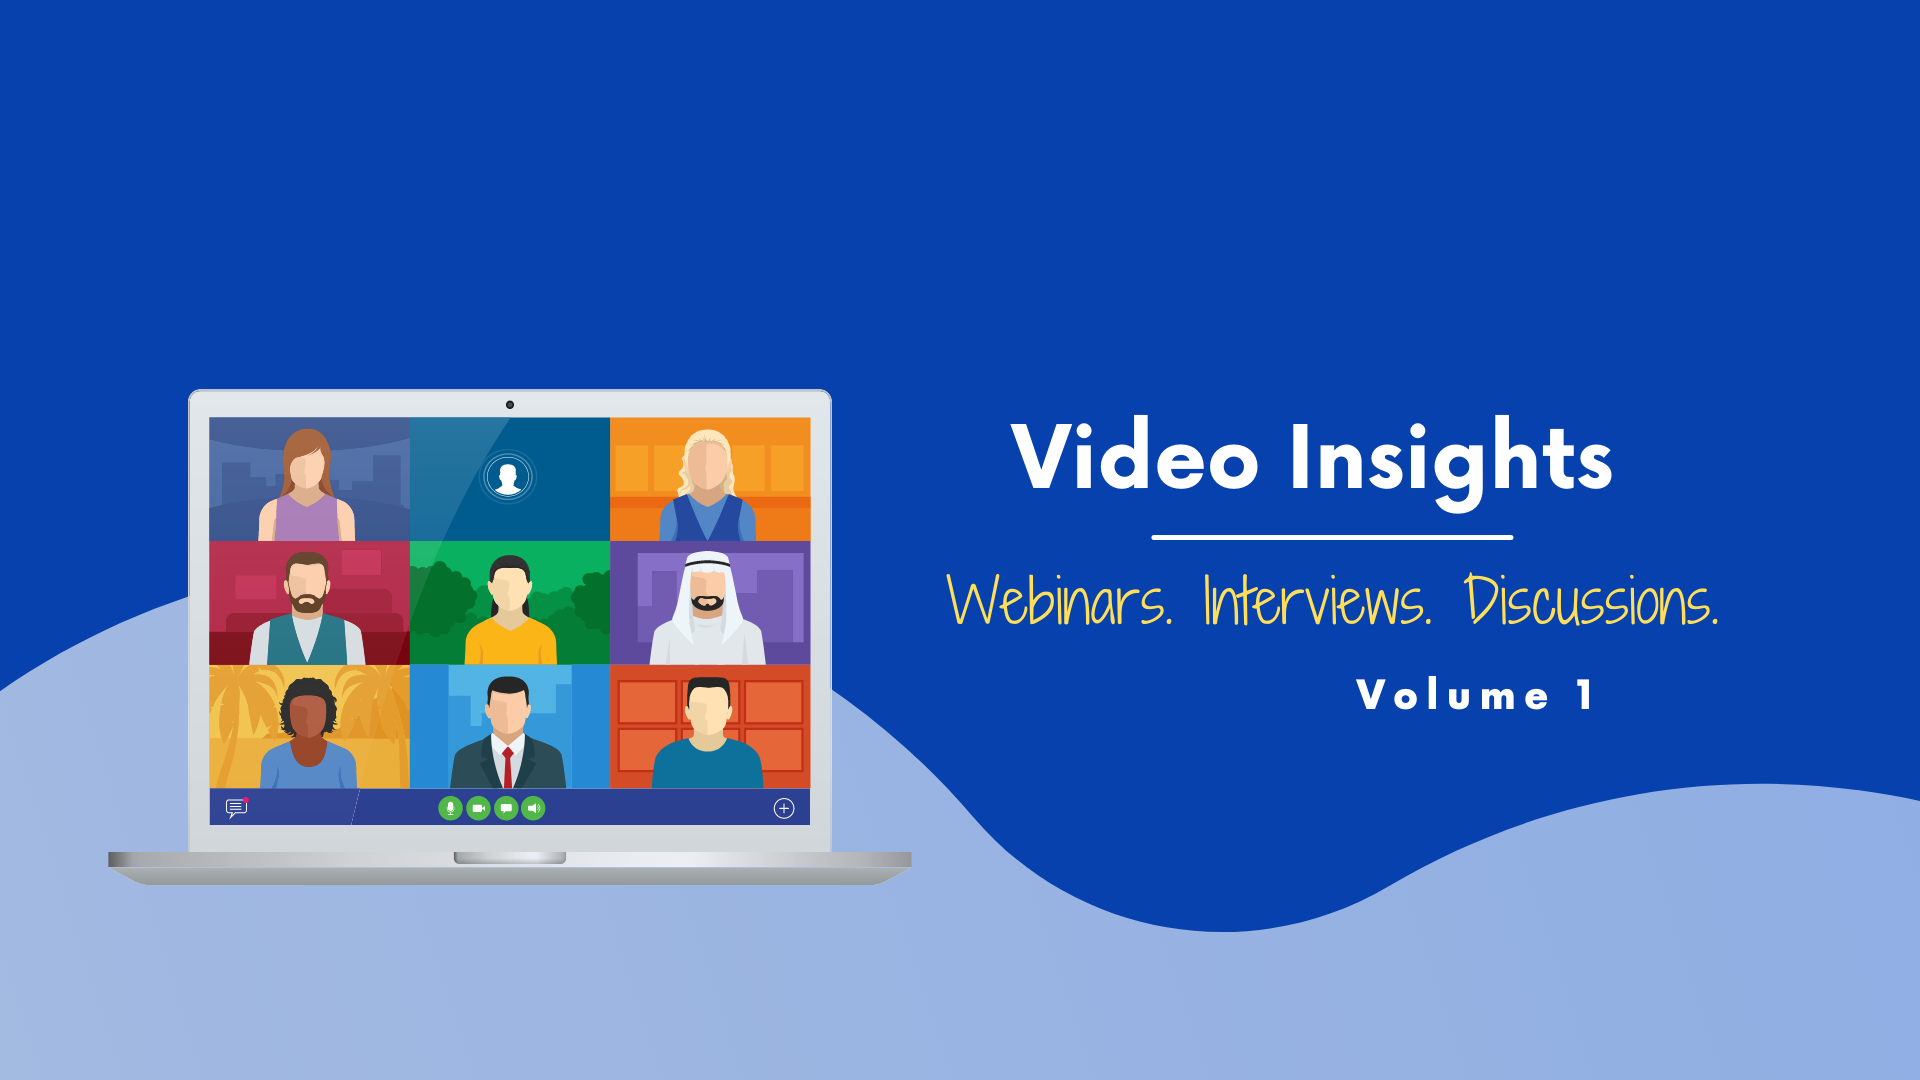 Video Insights: Webinars & Discussions (Volume 1)